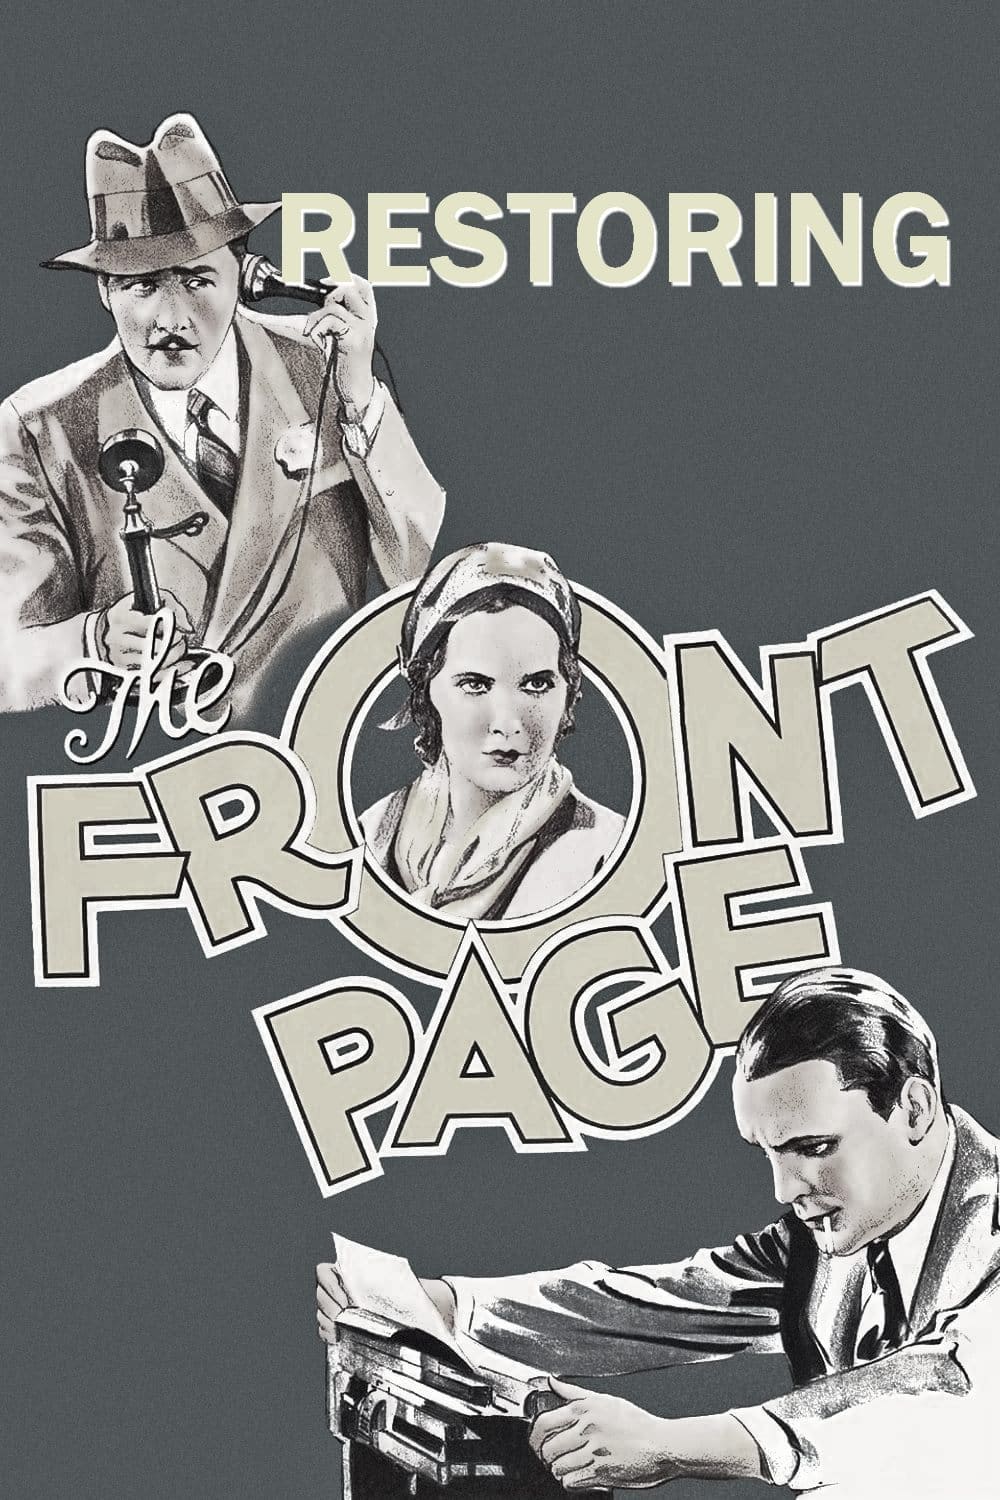 Restoring 'The Front Page'